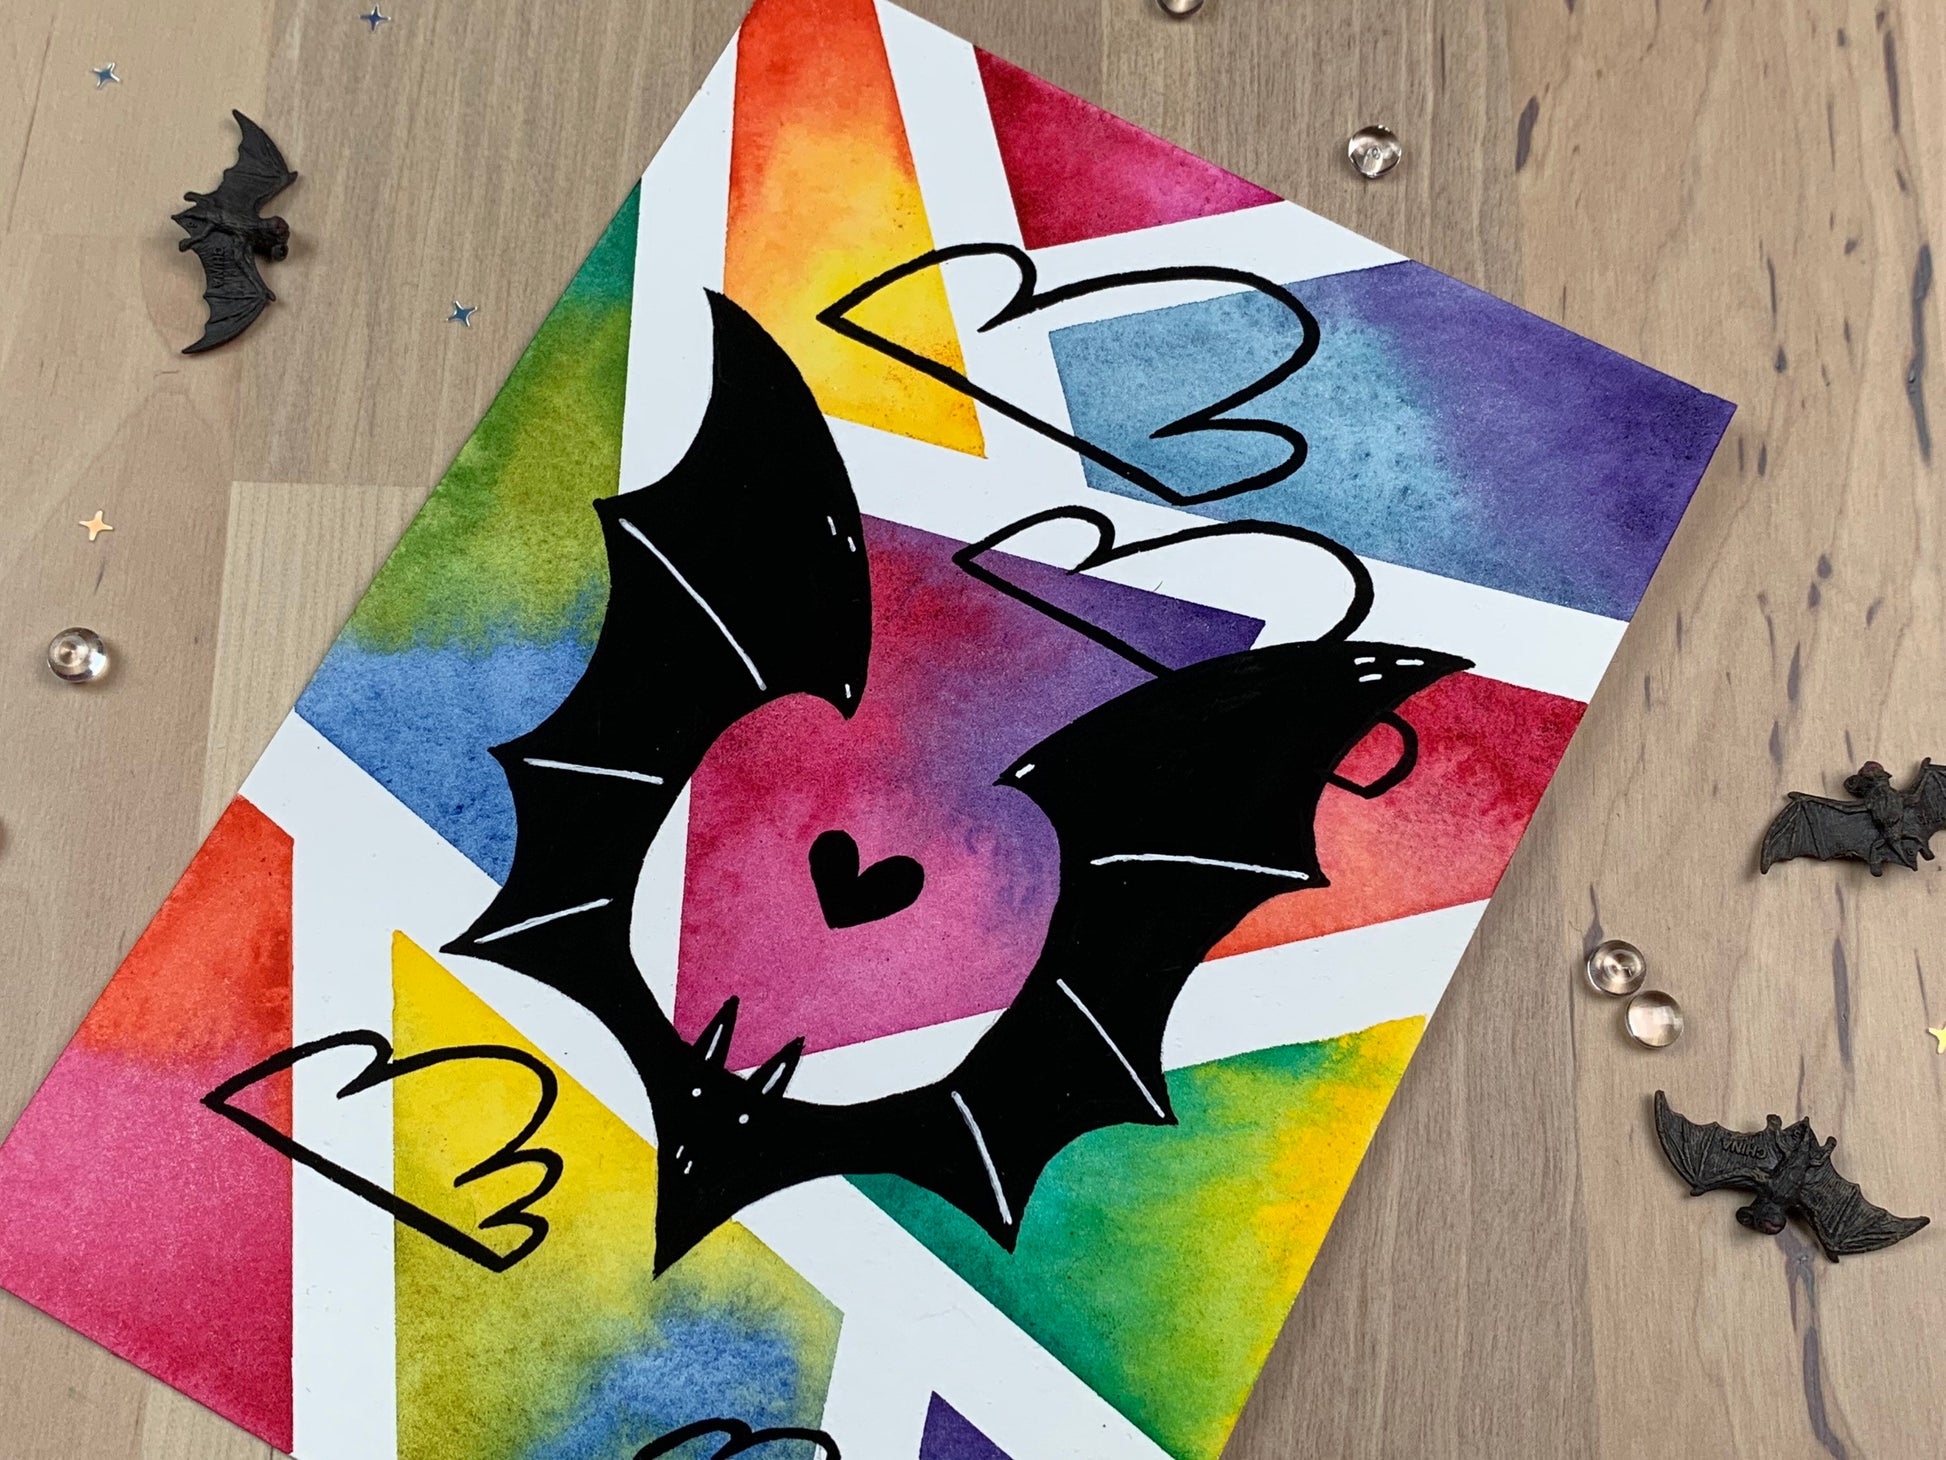 Original artwork depicting a colorful geometric watercolor and gouache painting of a bat.